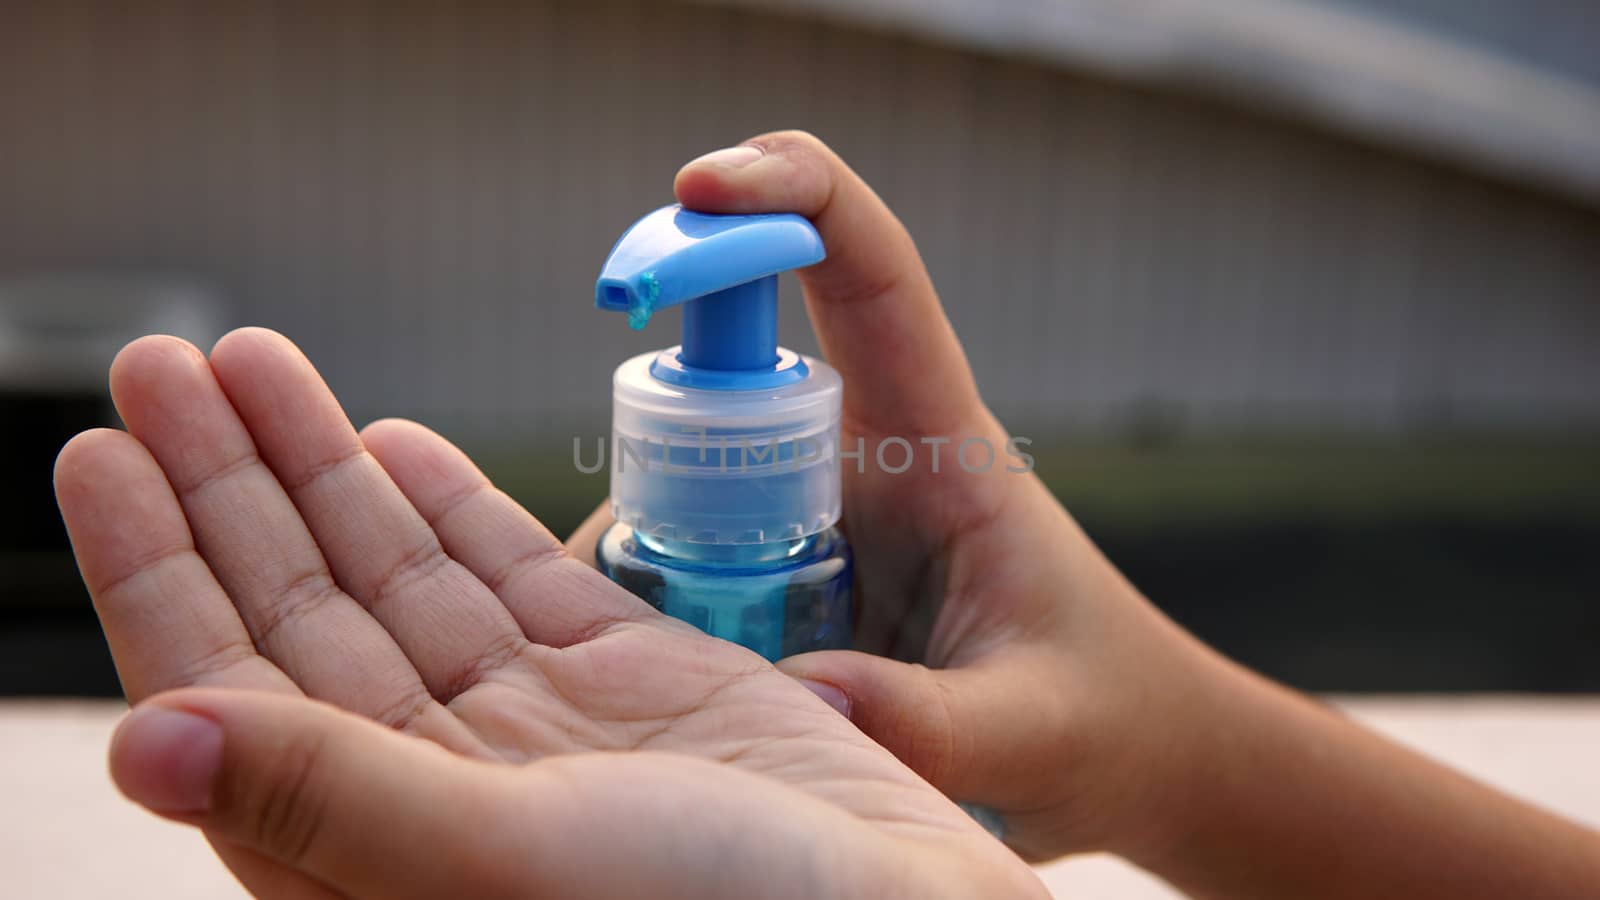 Kid washing hands with anti disinfectant alcohol based gel to protect from corona virus.